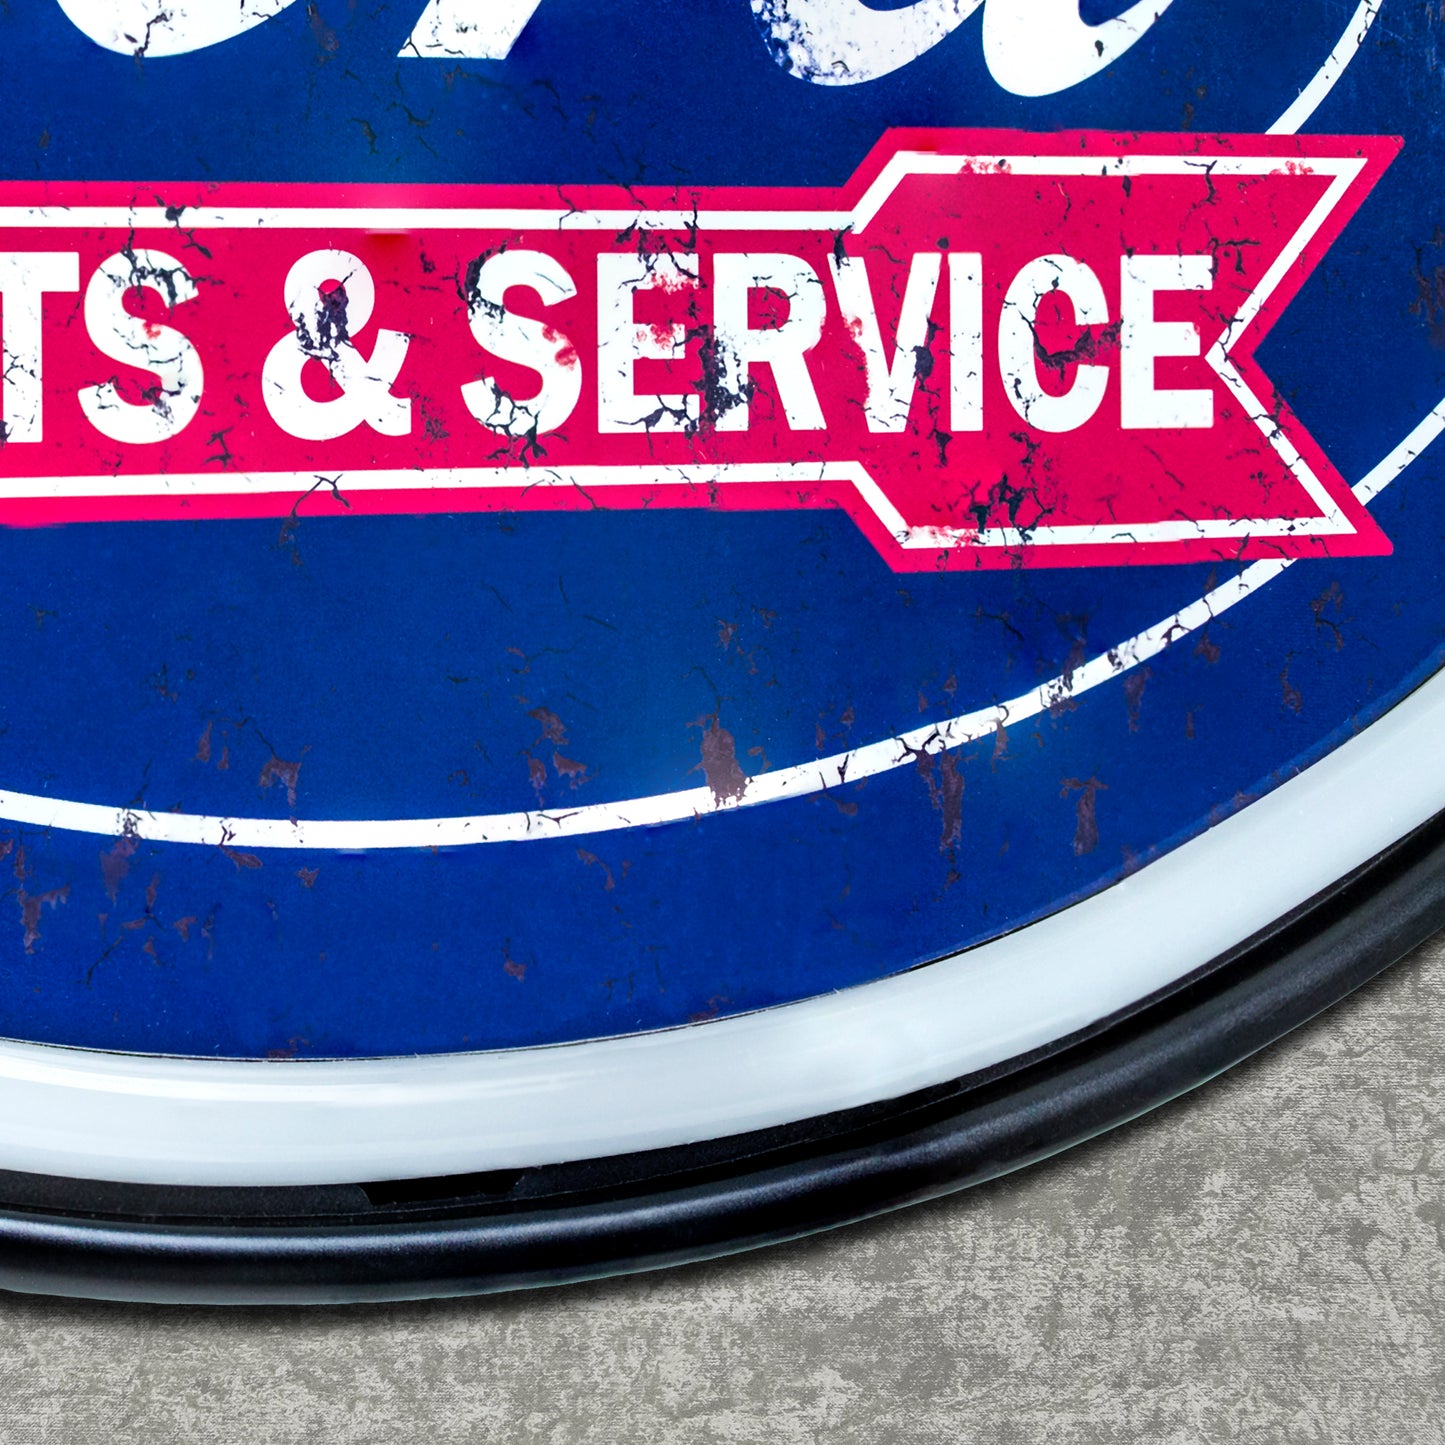 Officially Licensed Genuine Ford Parts & Service LED Neon Light Sign Wall Decor (10.25" x 16.25")